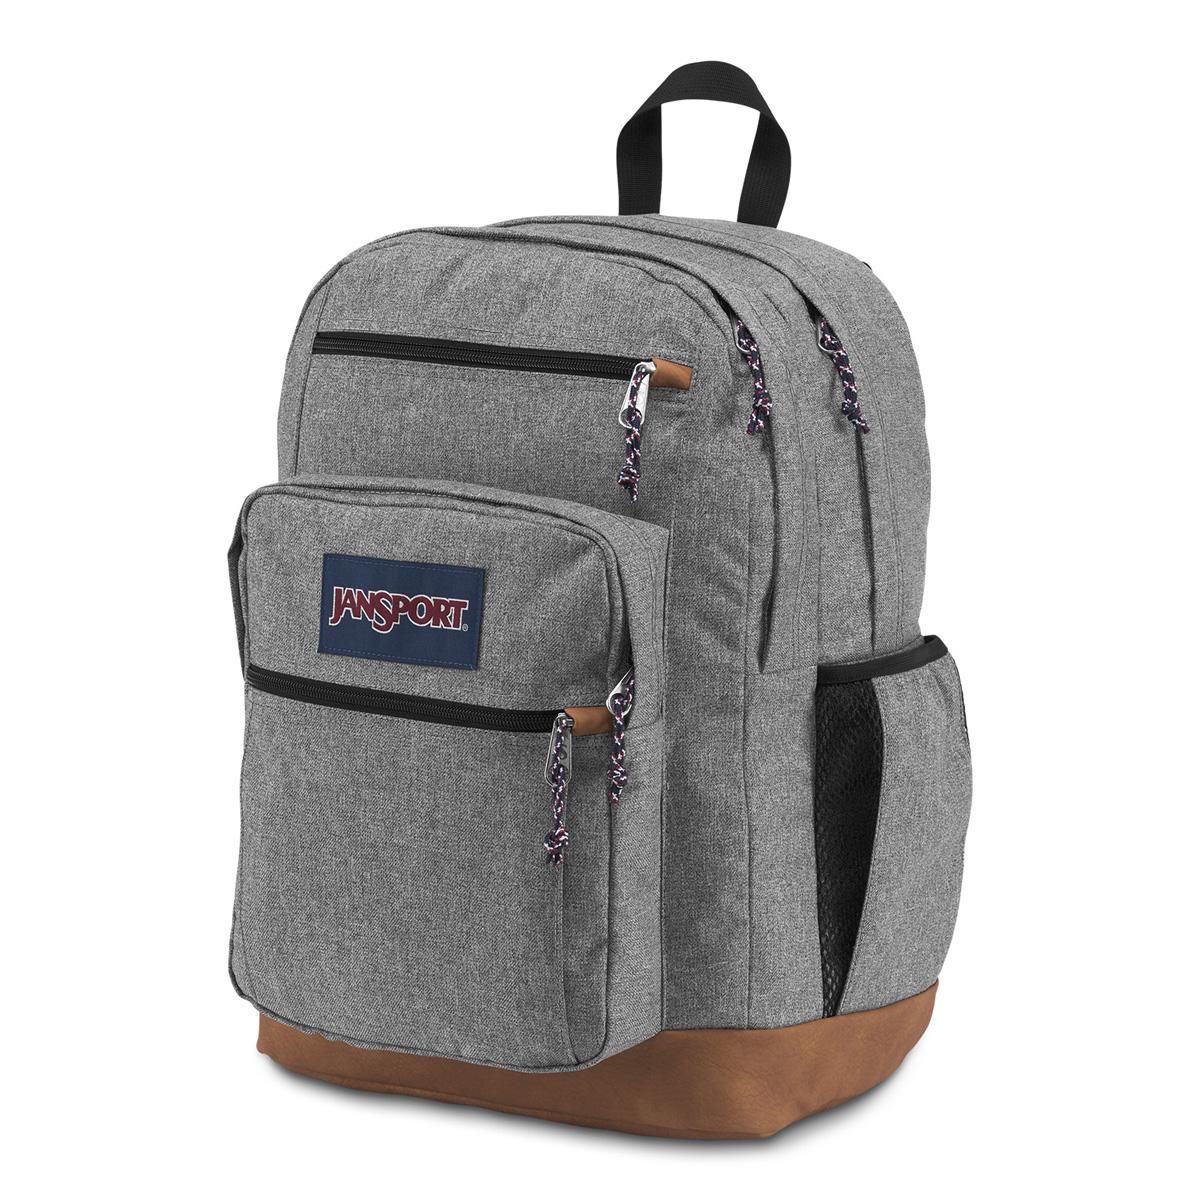 JanSport Cool Student Backpack with 15in Laptop Sleeve for $18.50